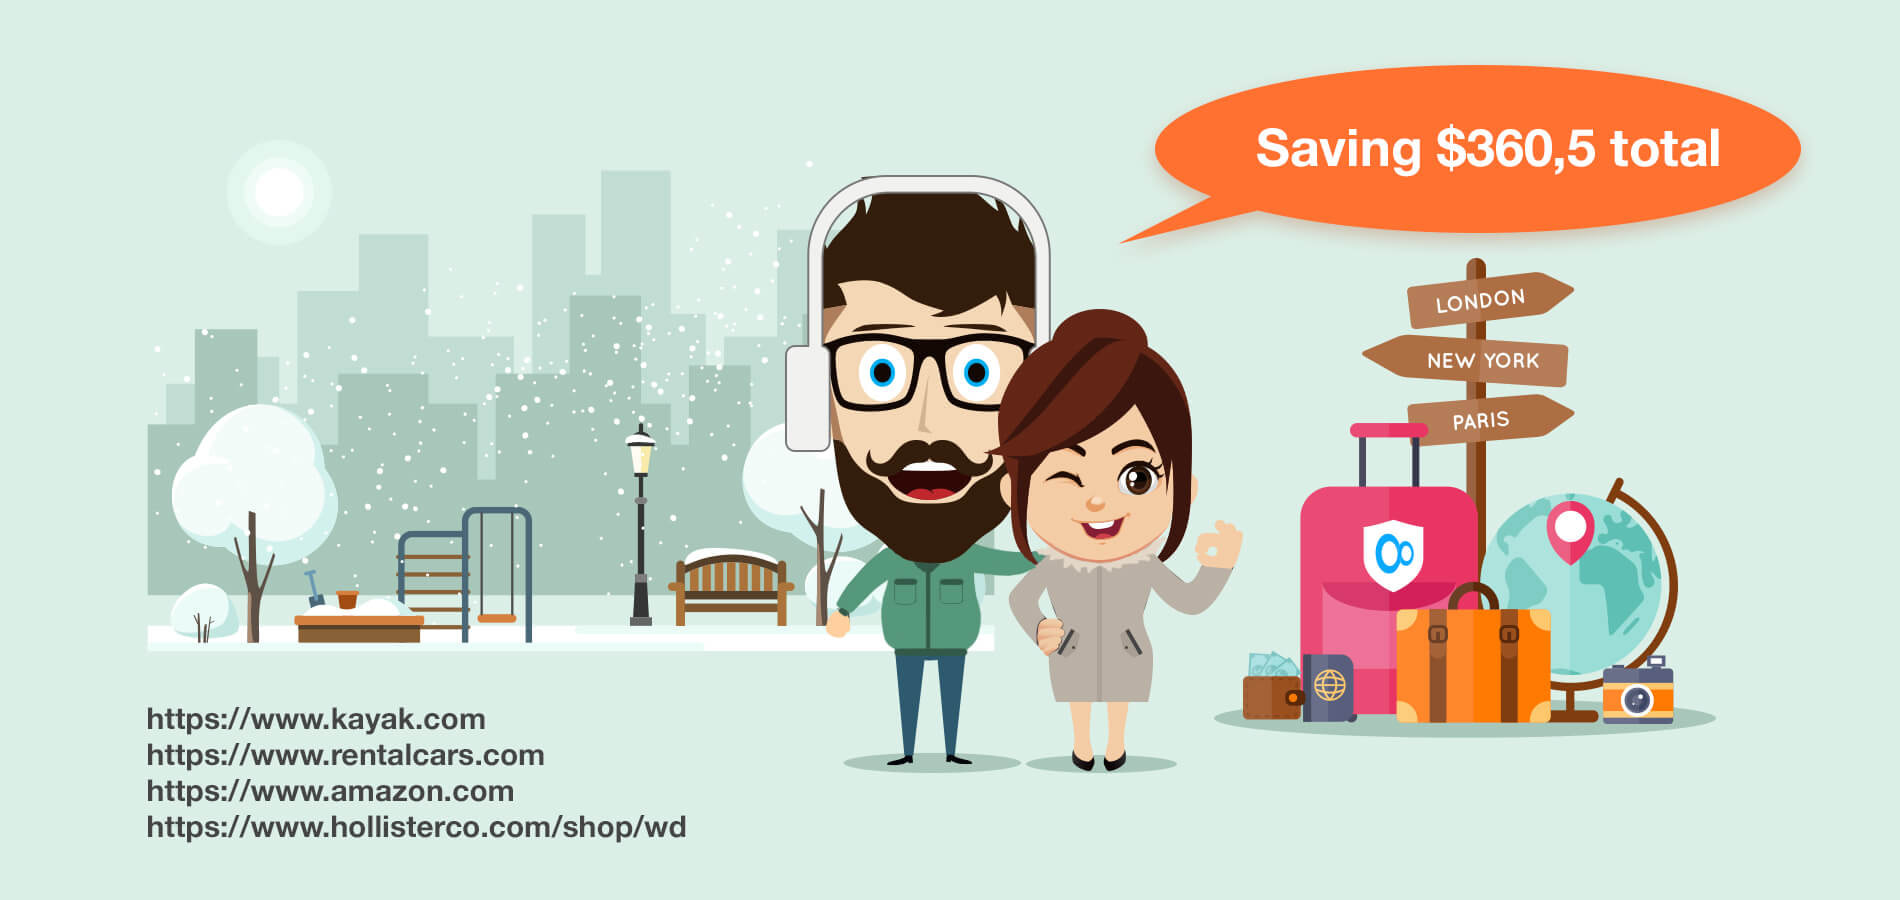 Save money shopping online with KeepSolid VPN Unlimited